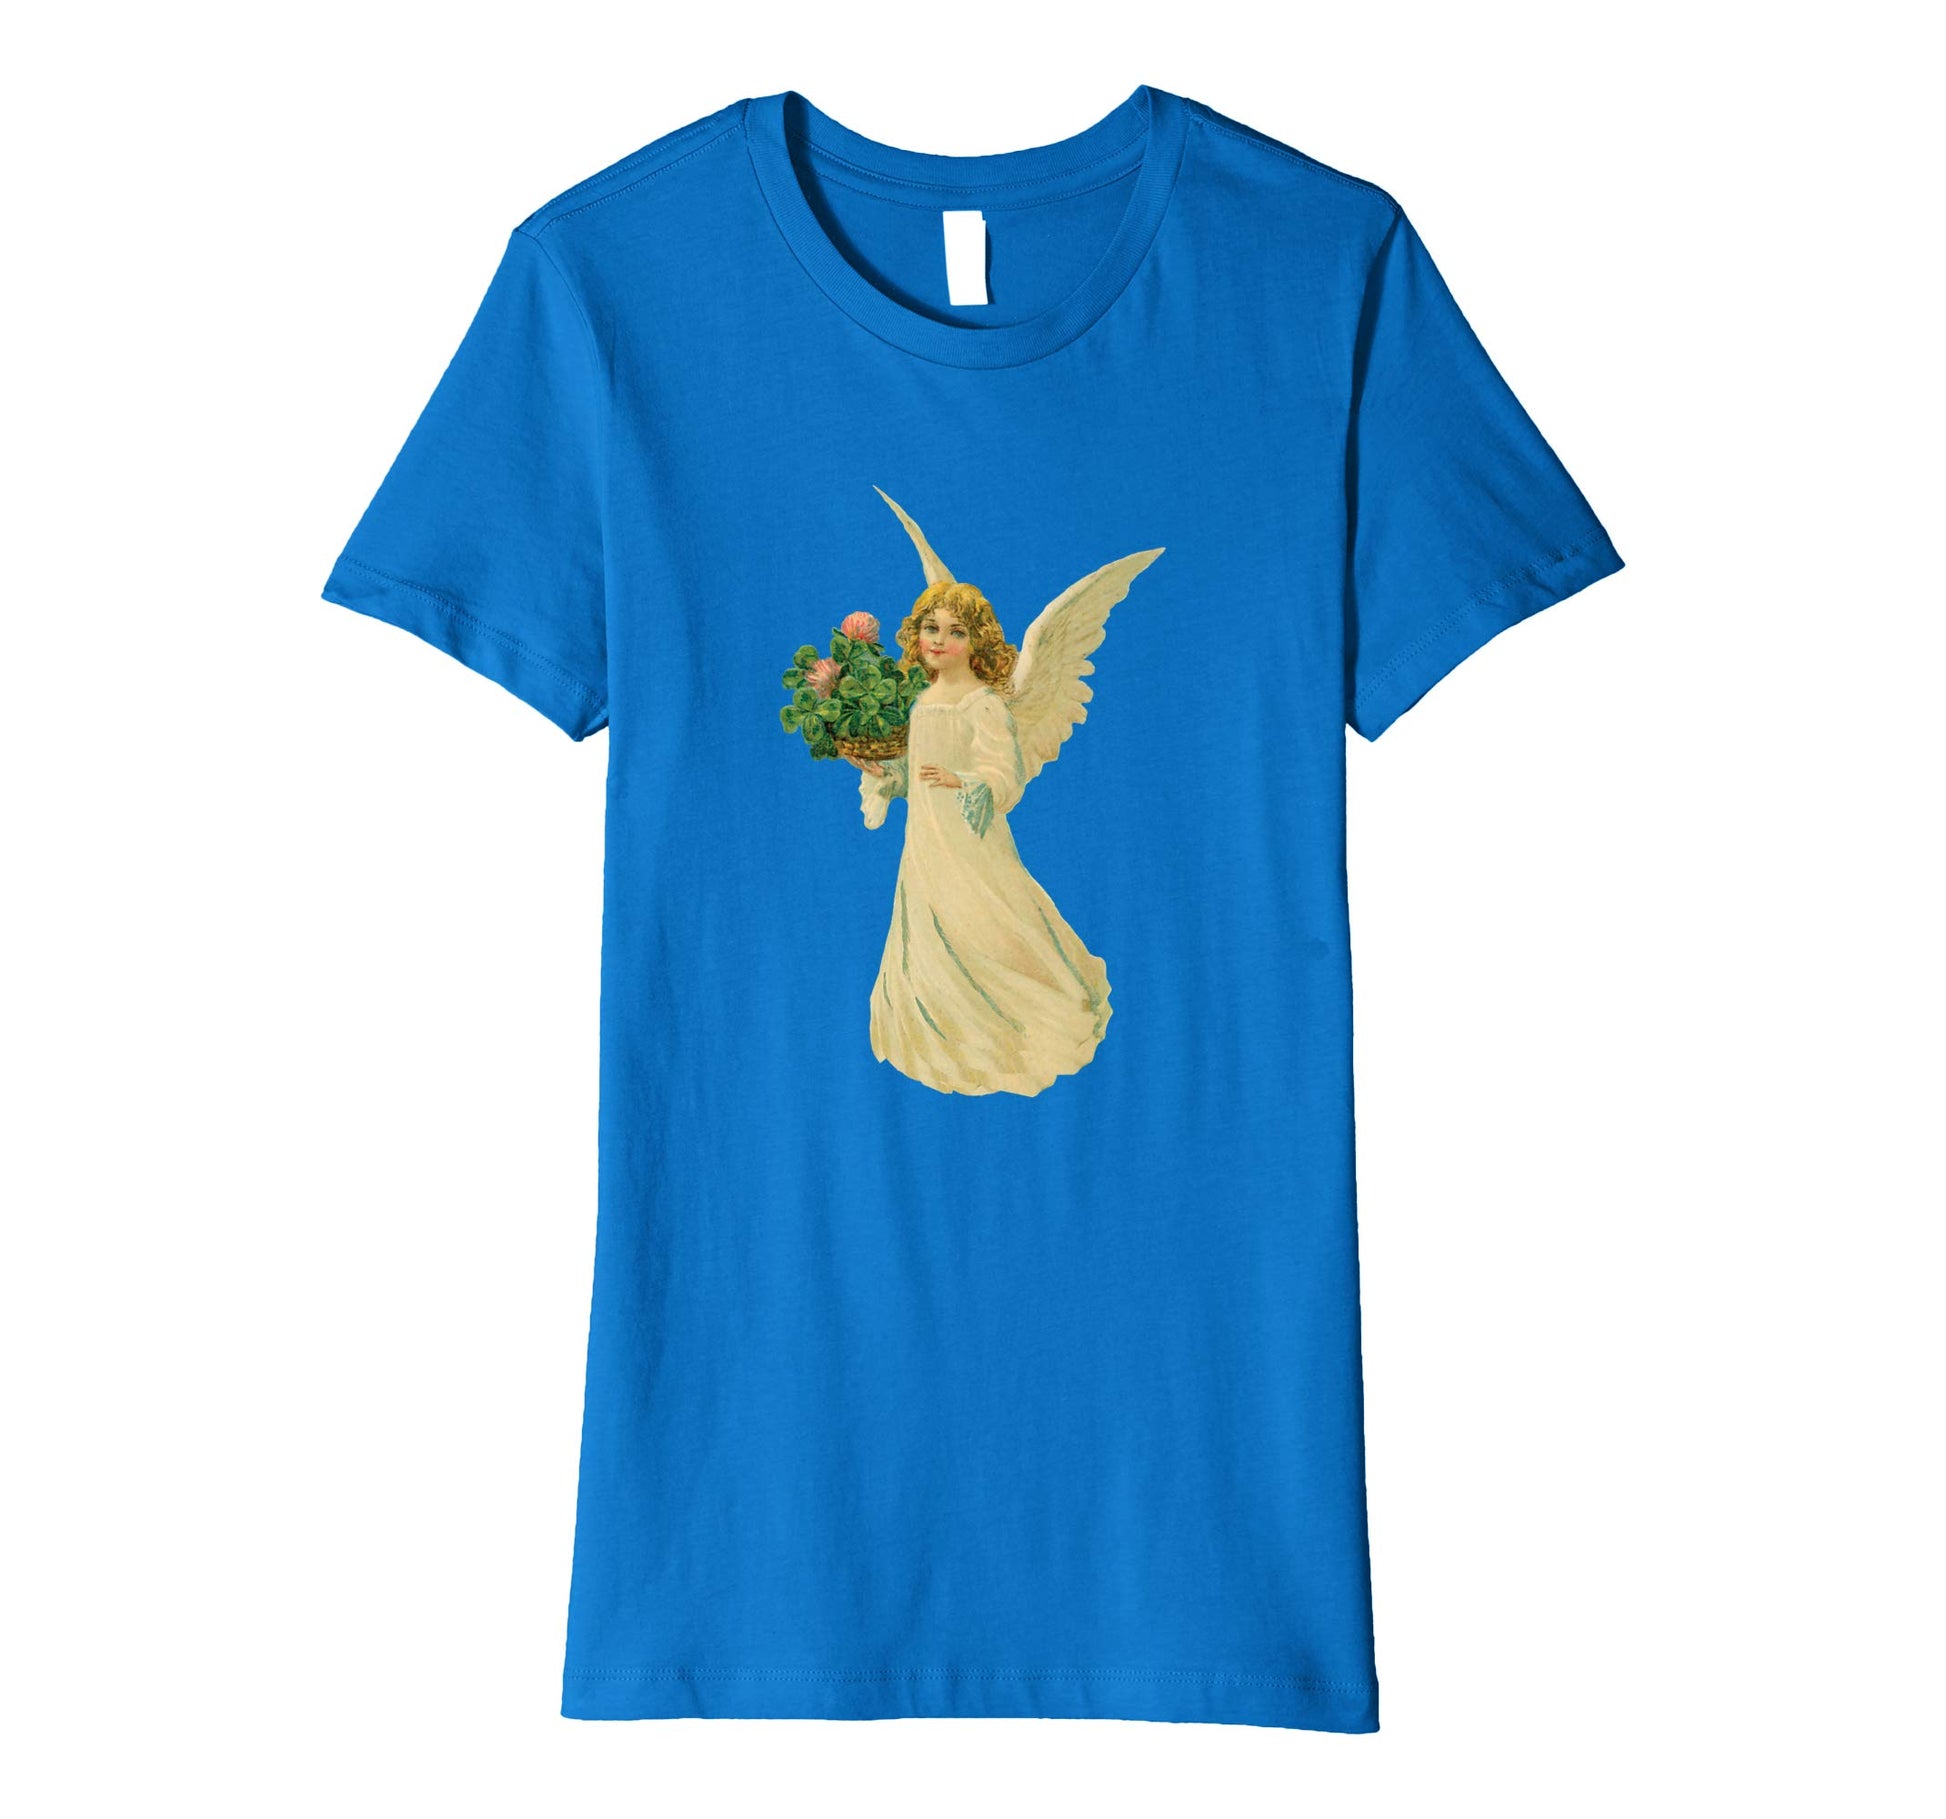 Womens Cotton Tee T-shirt Gift for Mom with Angel and Clover Art Royal Blue